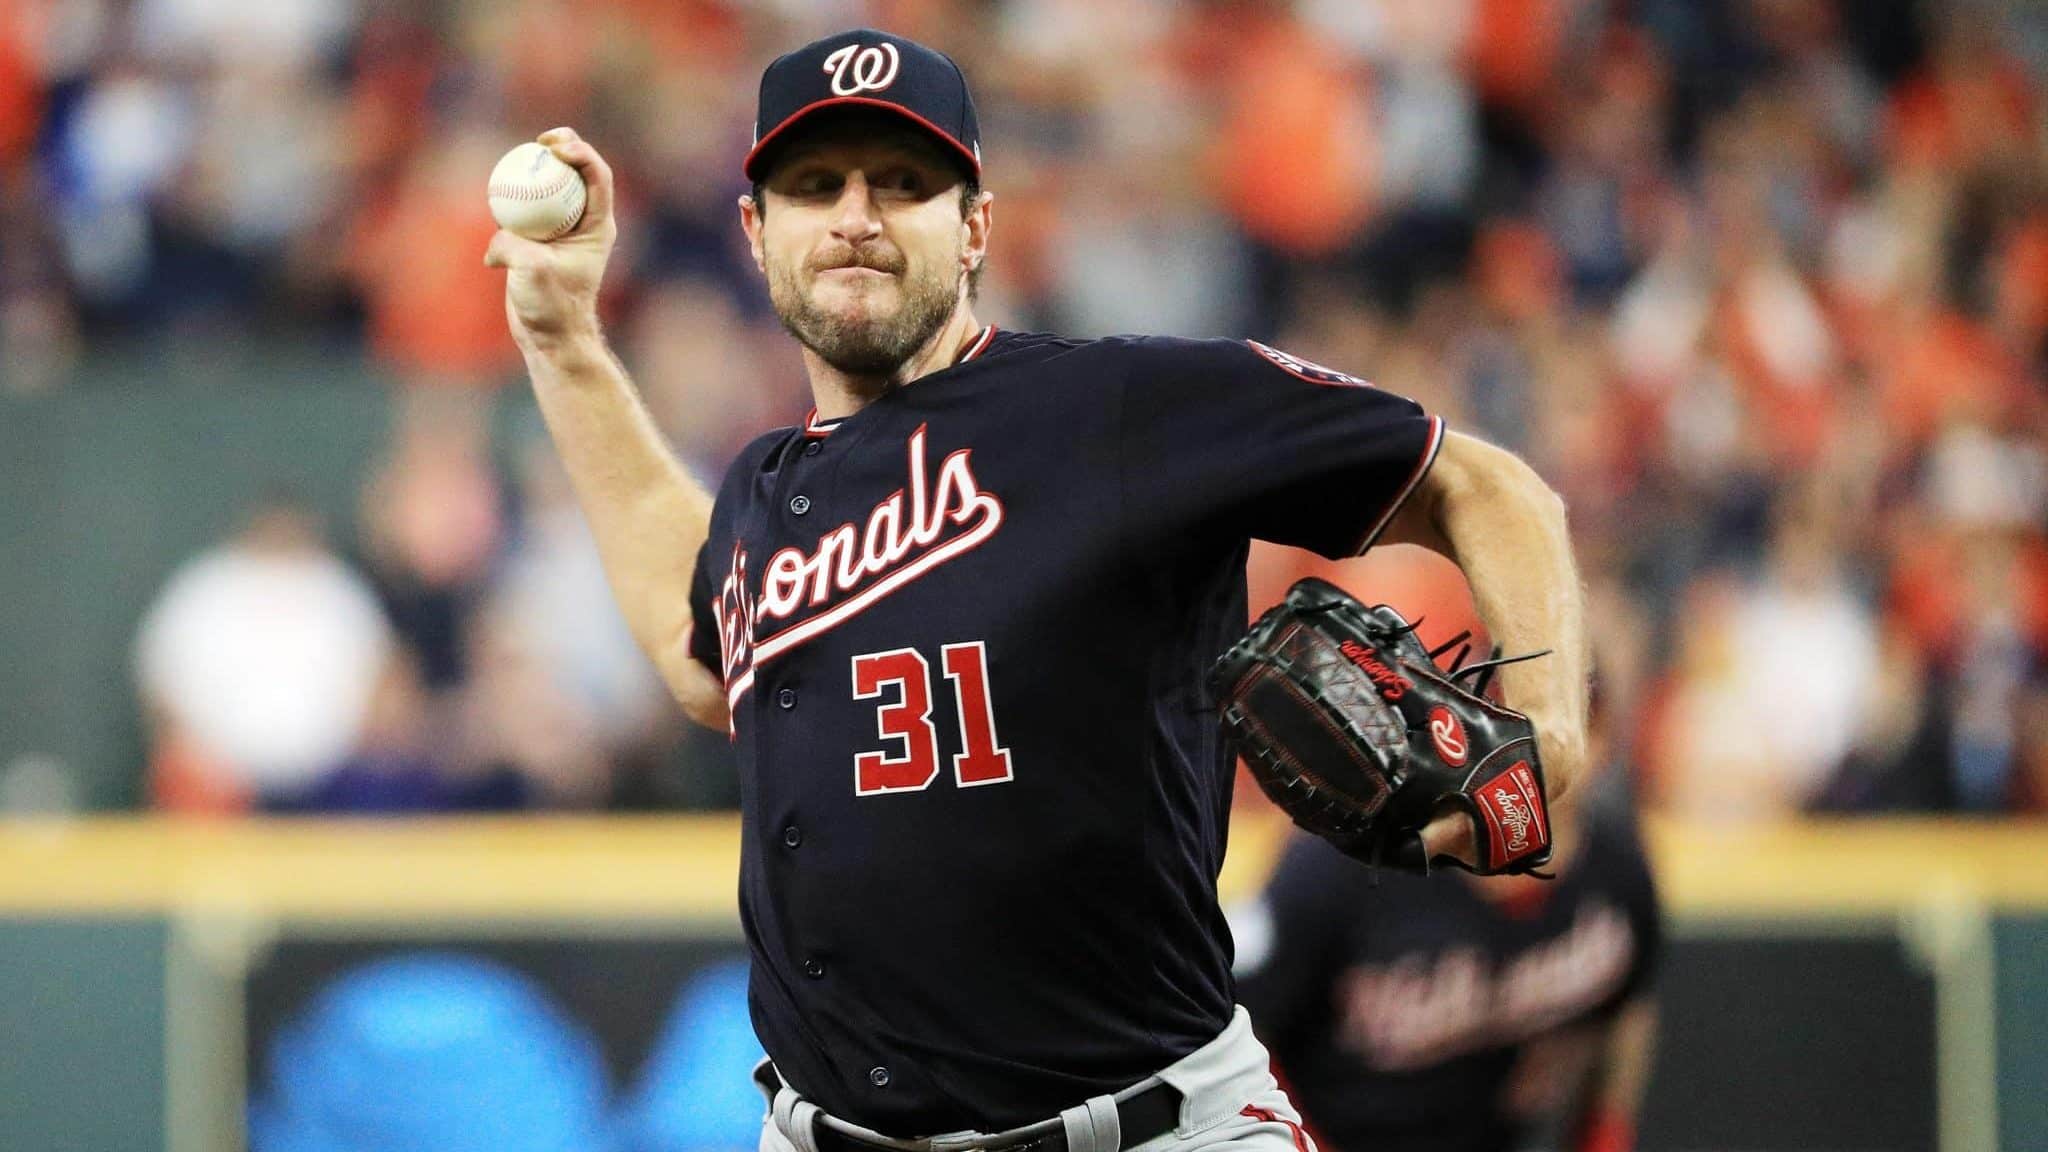 HOUSTON, TEXAS - OCTOBER 30: Max Scherzer #31 of the Washington Nationals delivers the pitch against the Houston Astros during the second inning in Game Seven of the 2019 World Series at Minute Maid Park on October 30, 2019 in Houston, Texas.